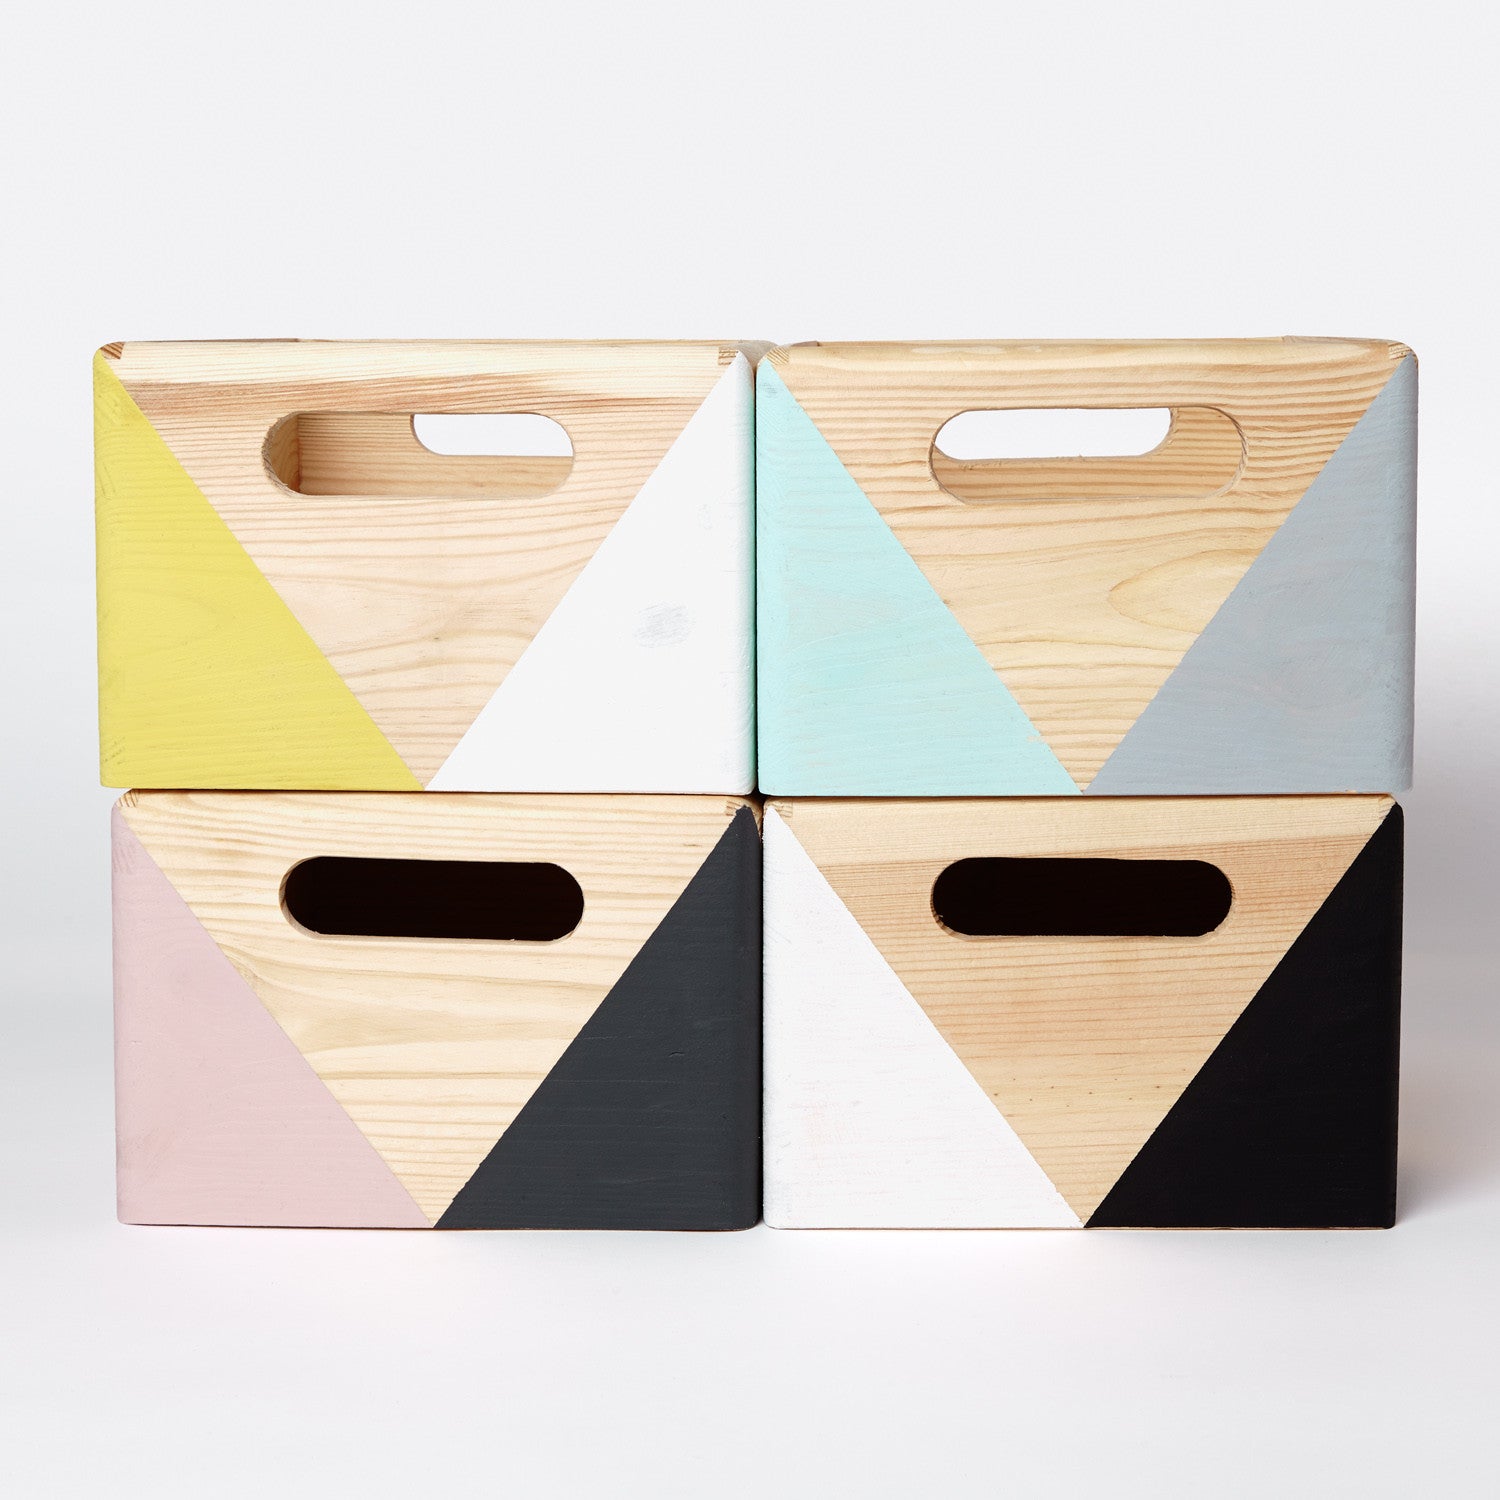 Geometric wooden box with handles - Happy Little Folks